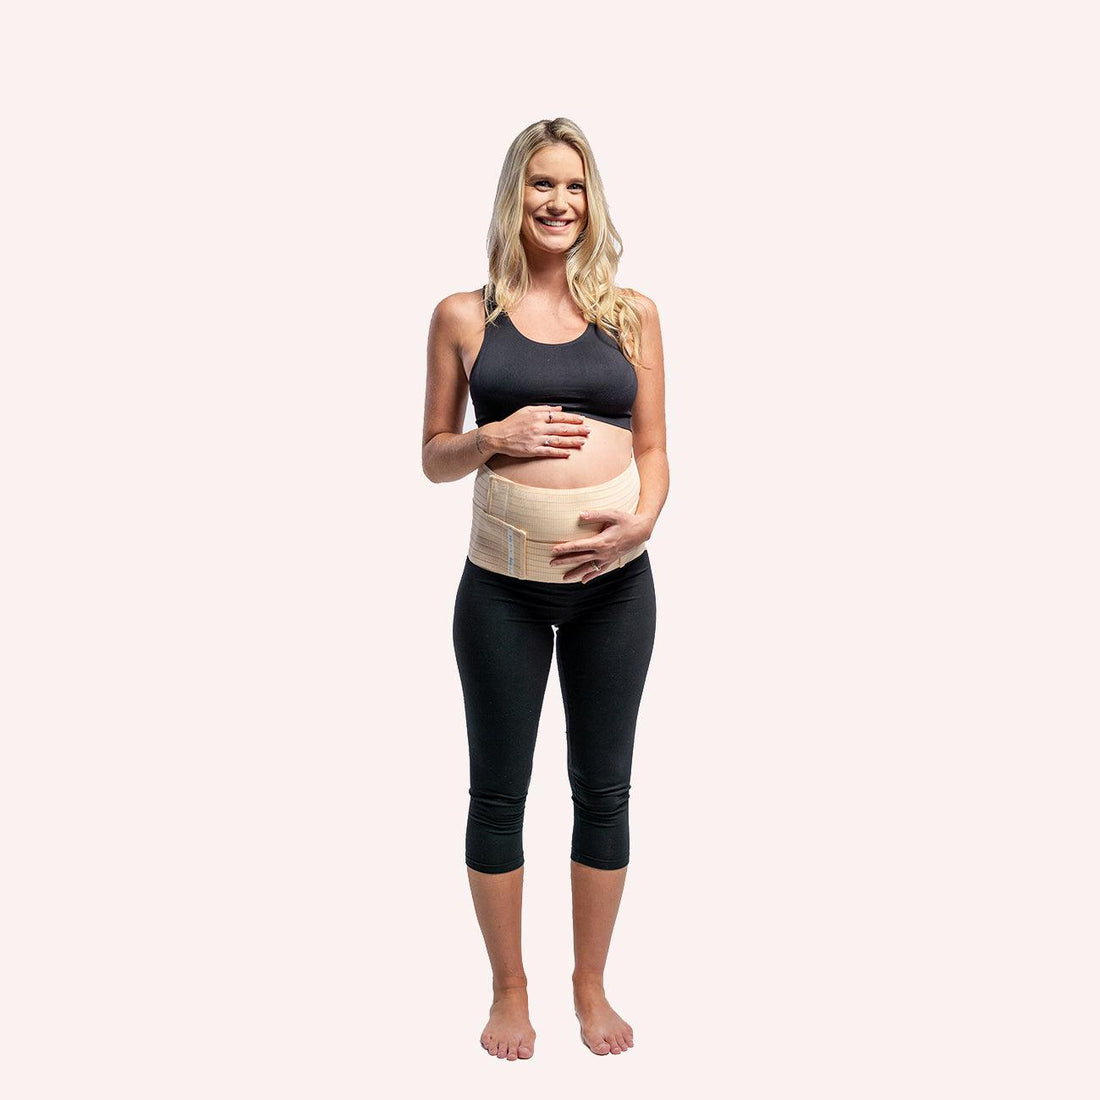 Bellefit Official, I'm 5'2 with a petite frame and gained 40lbs each with  both my pregnancies which took a huge toll on my body. After my first  pregnancy I